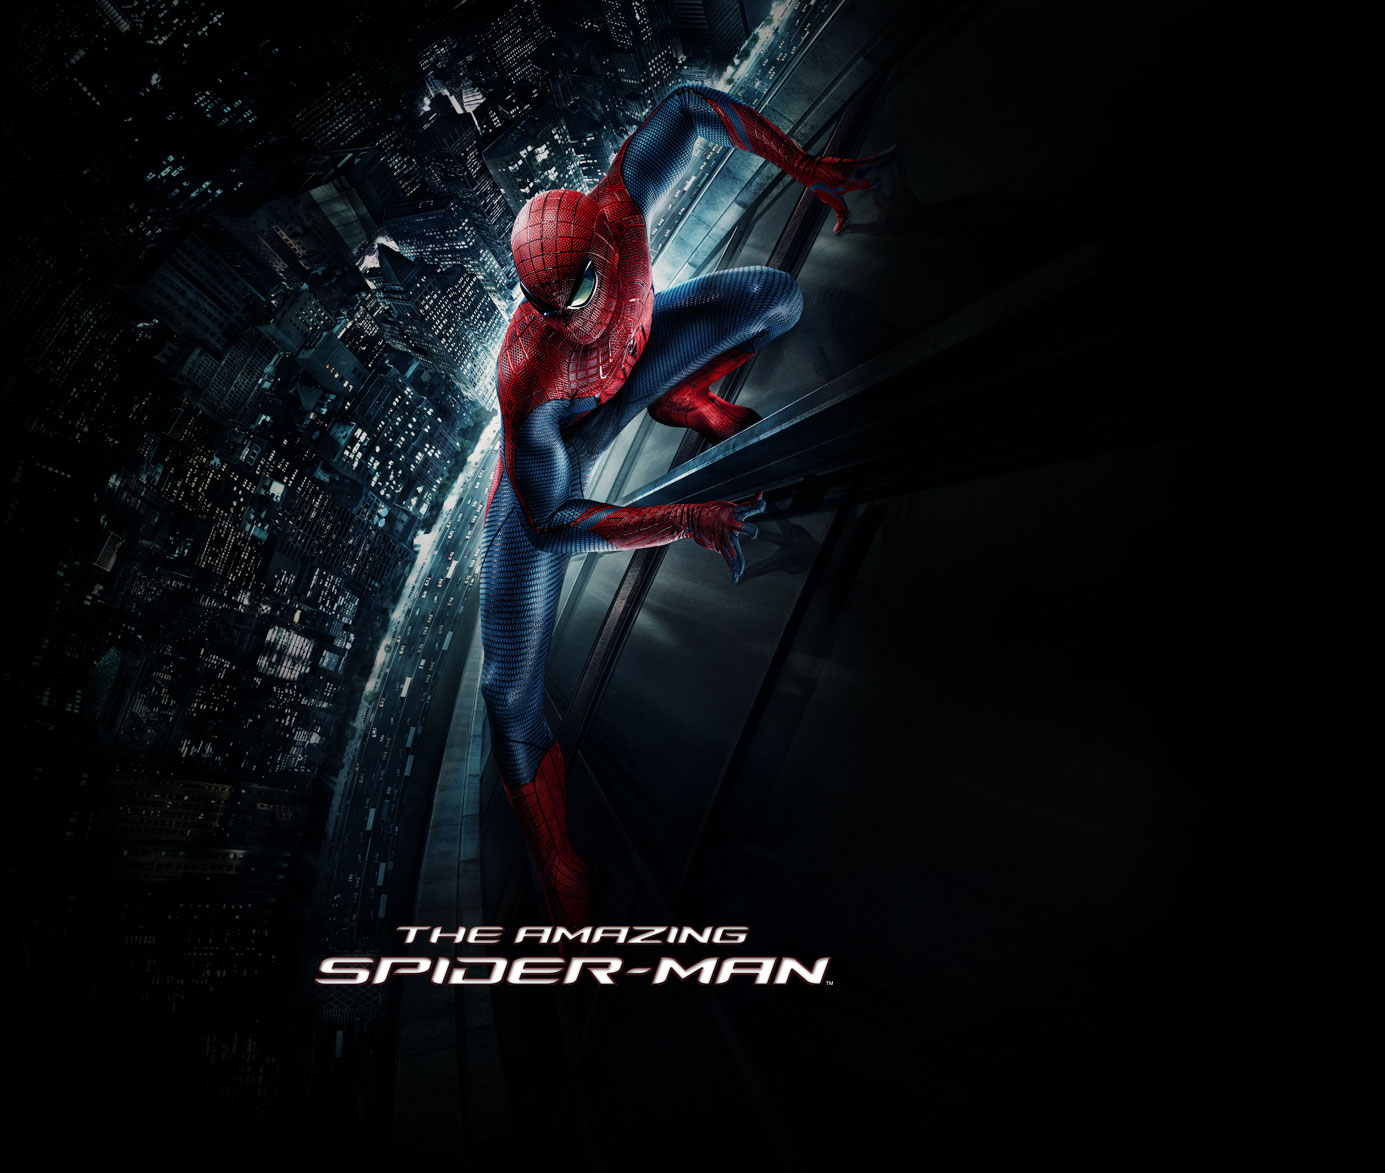 The Amazing Spider-Man Tablet PC Wallpapers ~ Tablet PC Wallpapers